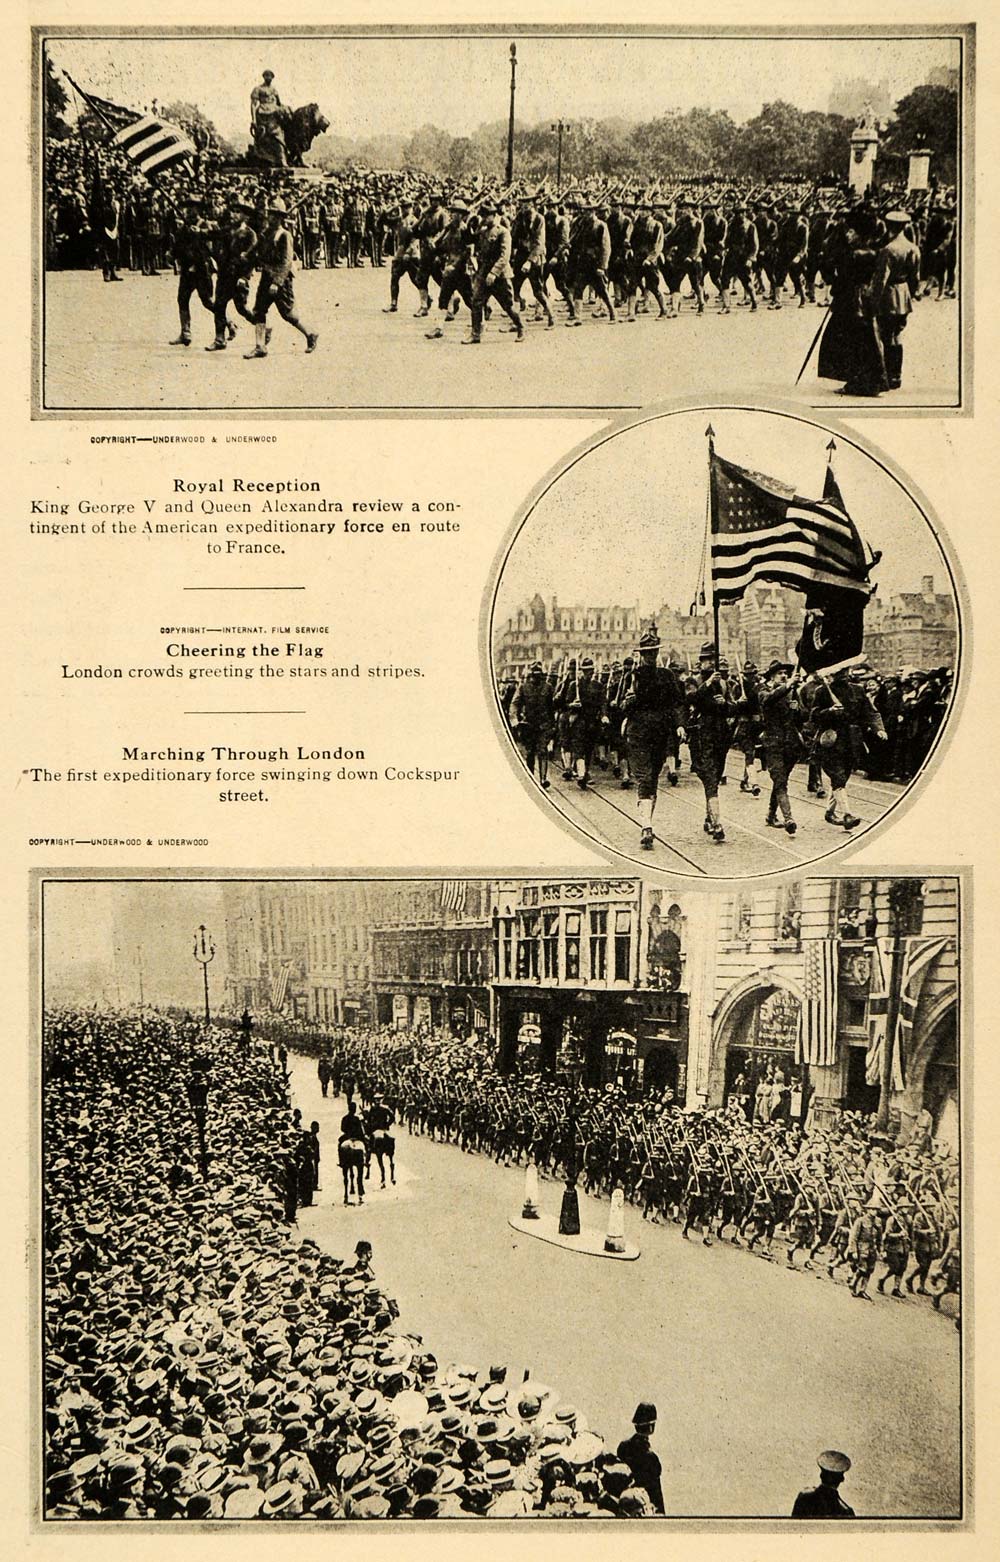 1917 Print WWI American Troops March London to France - ORIGINAL HISTORIC ILW2